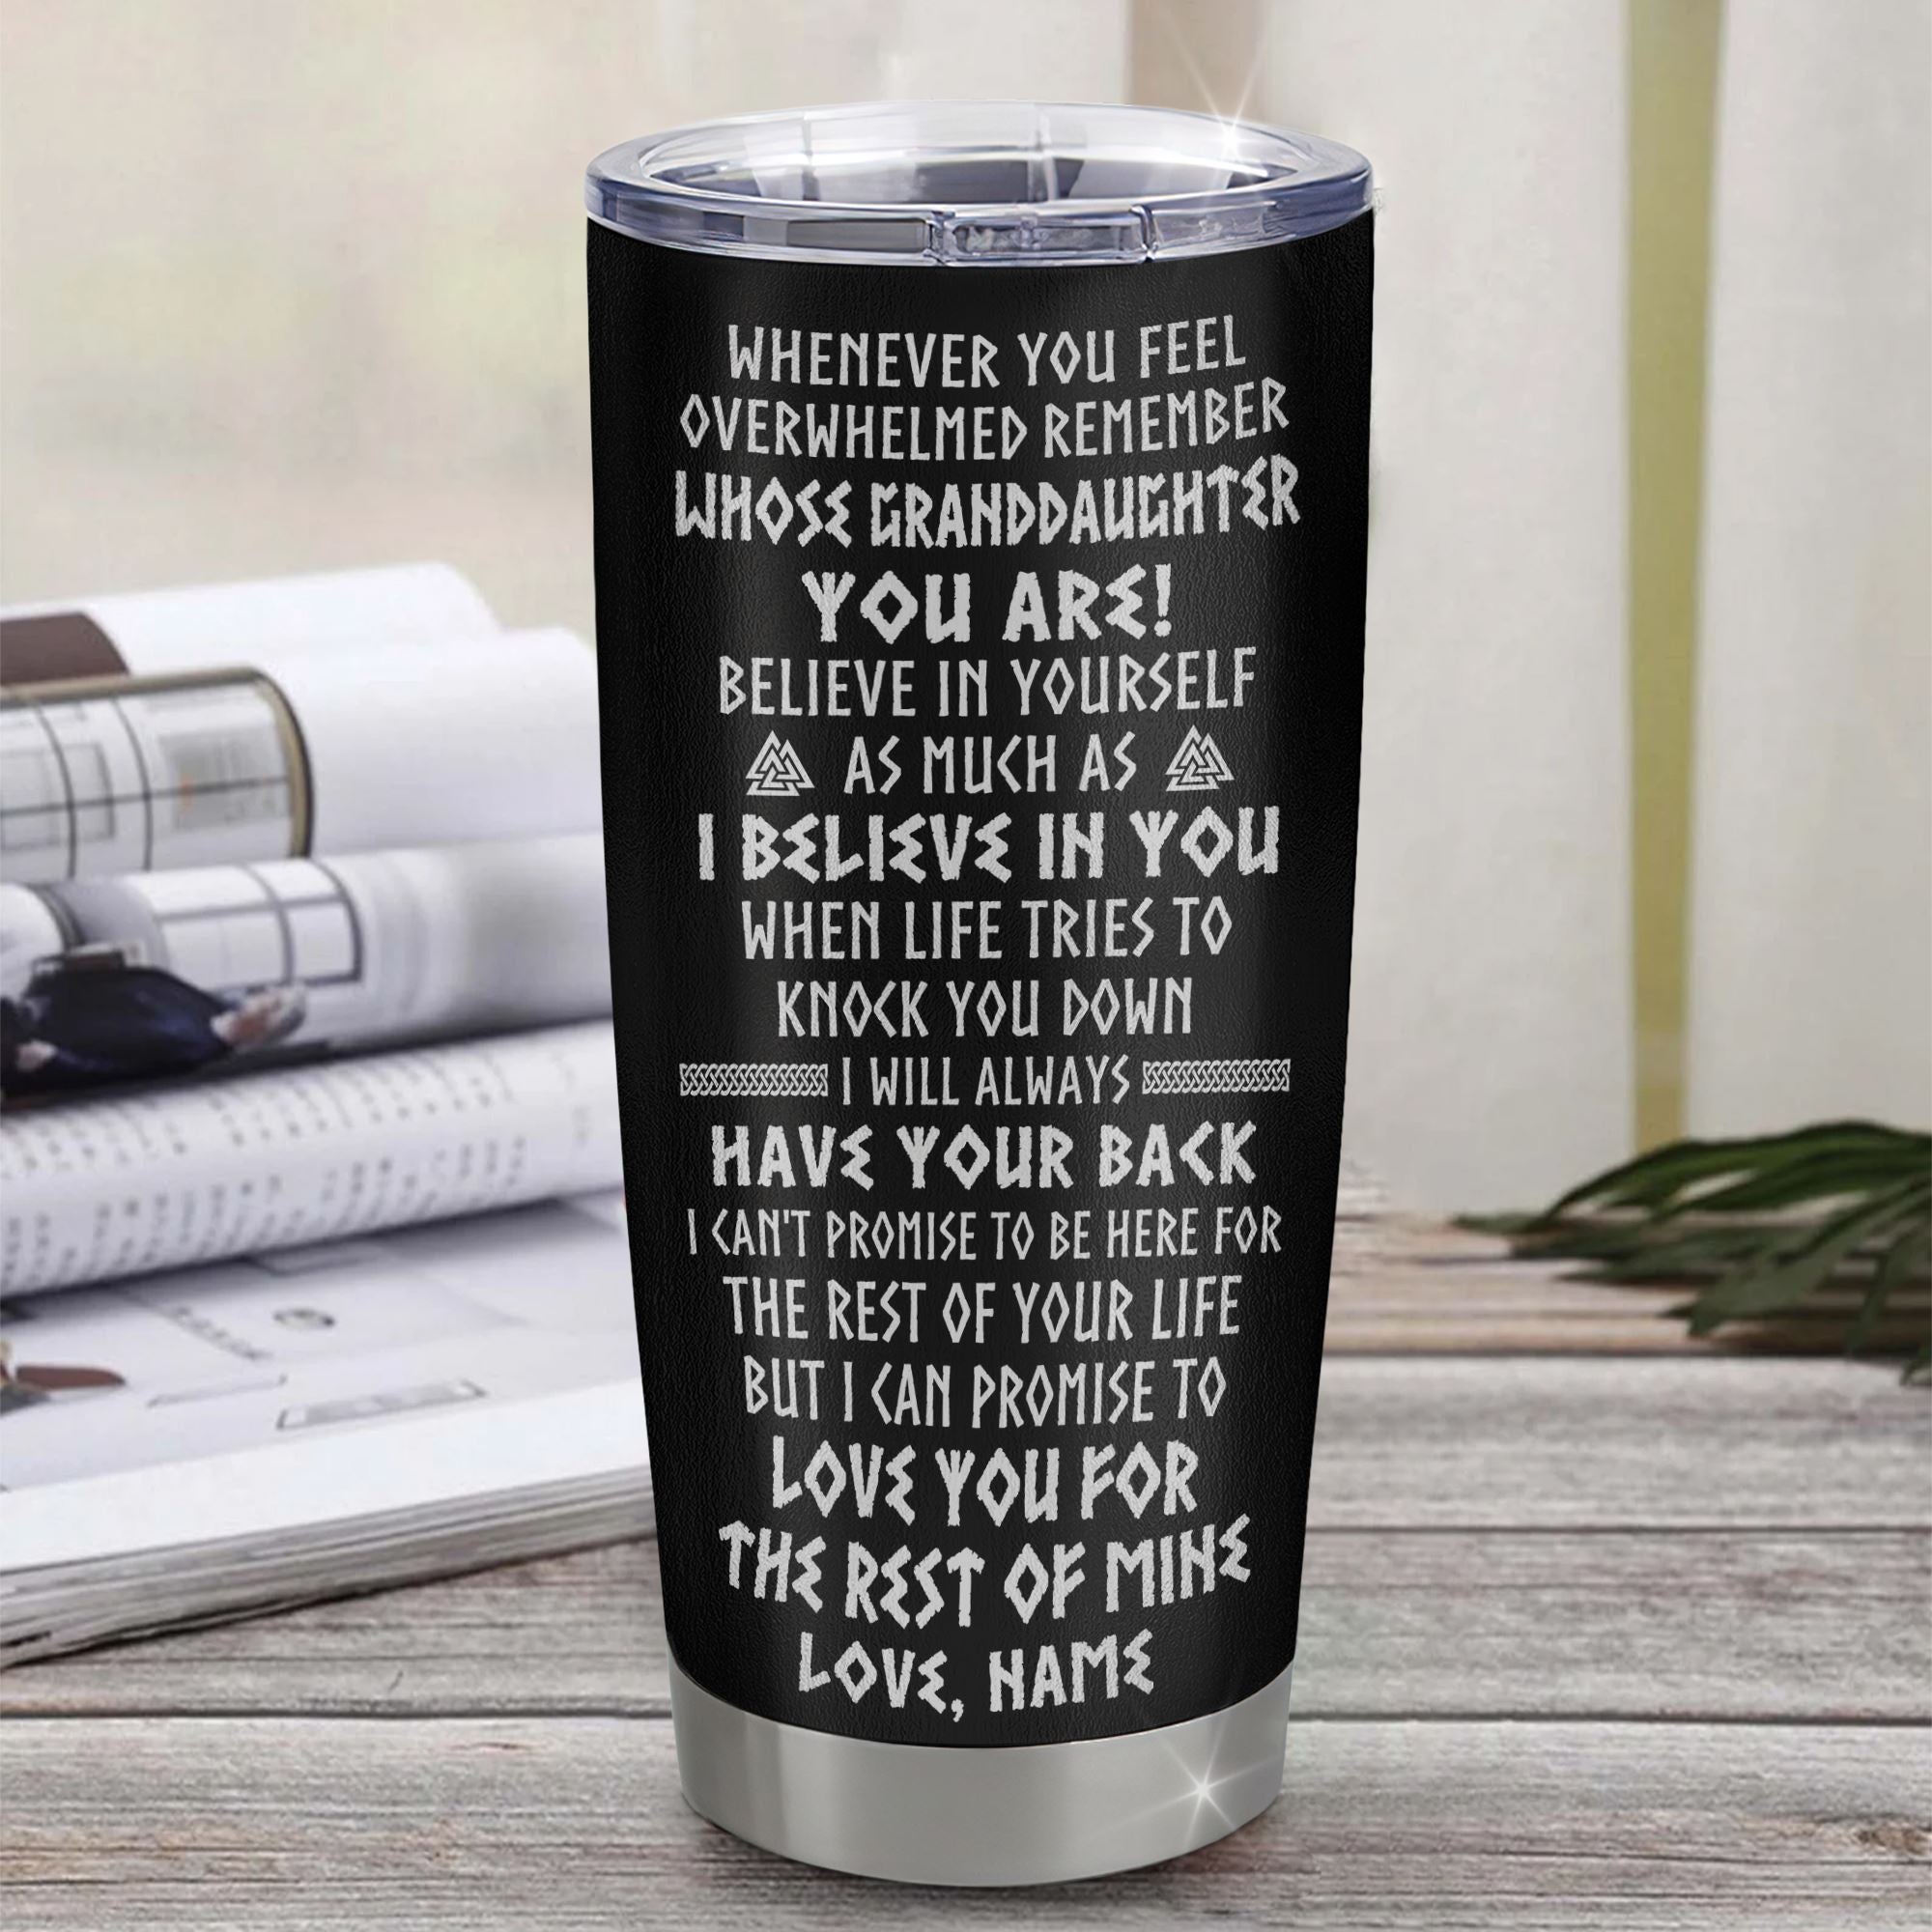 Personalized_To_My_Granddaughter_Viking_Tumbler_From_Grandpa_Stainless_Steel_Cup_Whenever_You_Feel_Overwhelmed_Birthday_Christmas_Travel_Mug_Tumbler_mockup_1.jpg